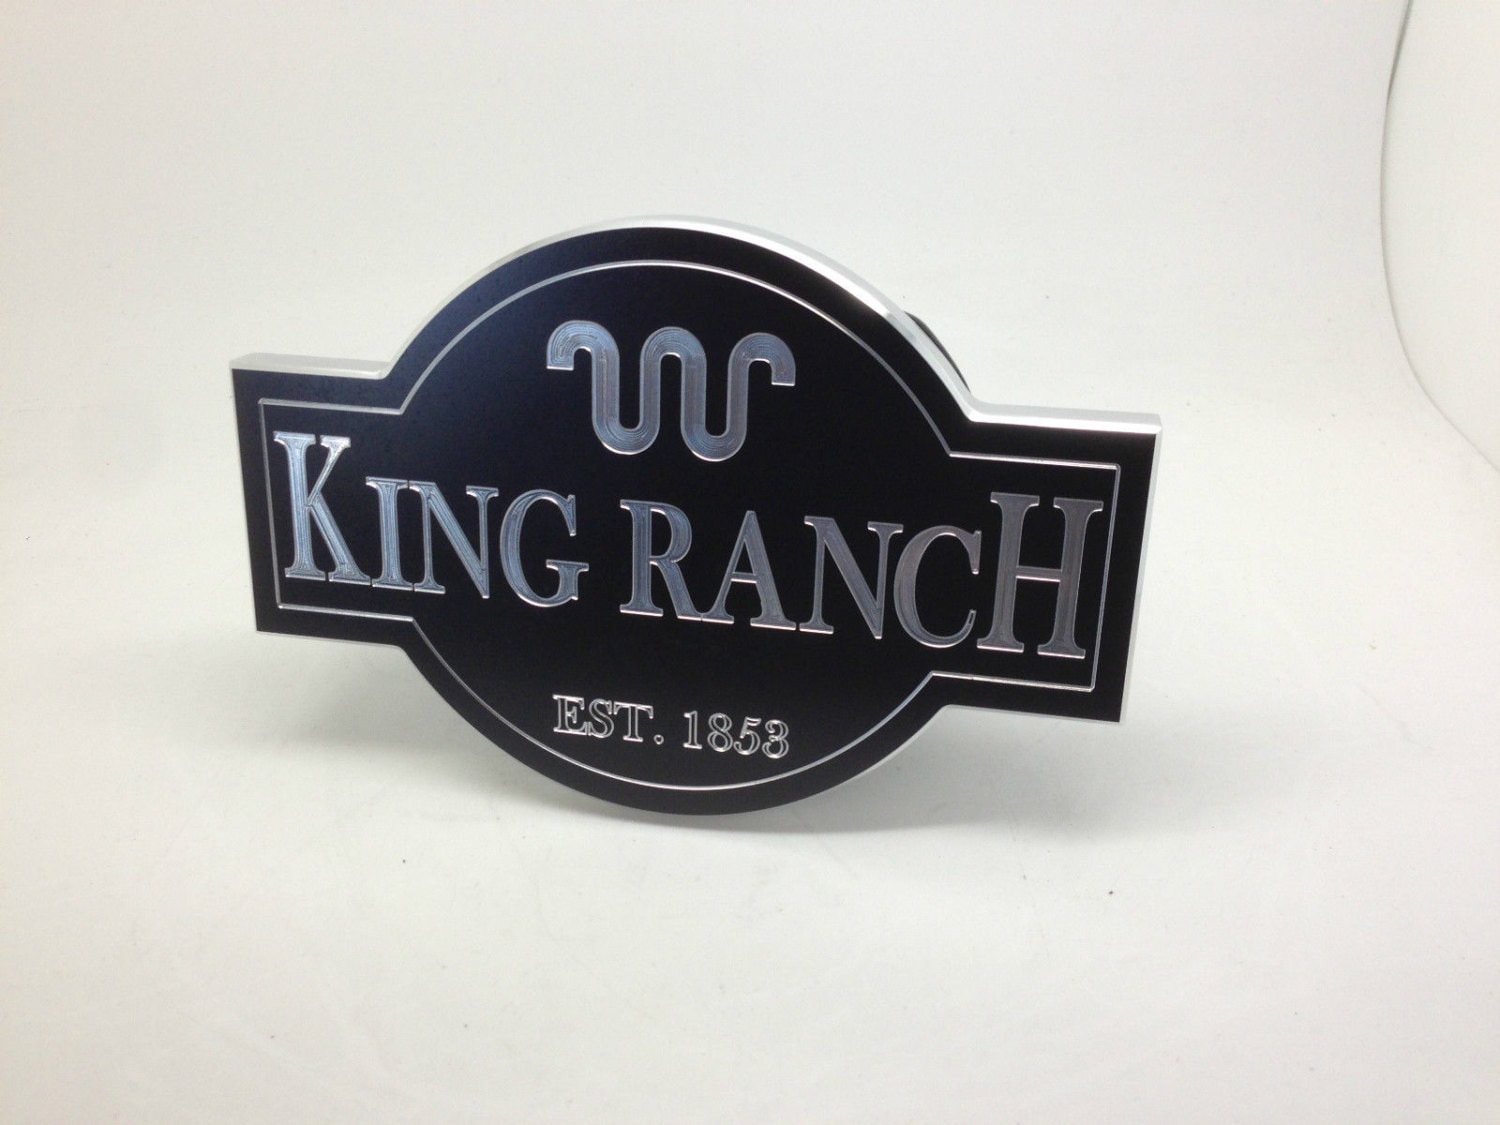 Billet Aluminum Trailer Hitch Cover Ford King Ranch 4x6 King Ranch Trailer Hitch Cover